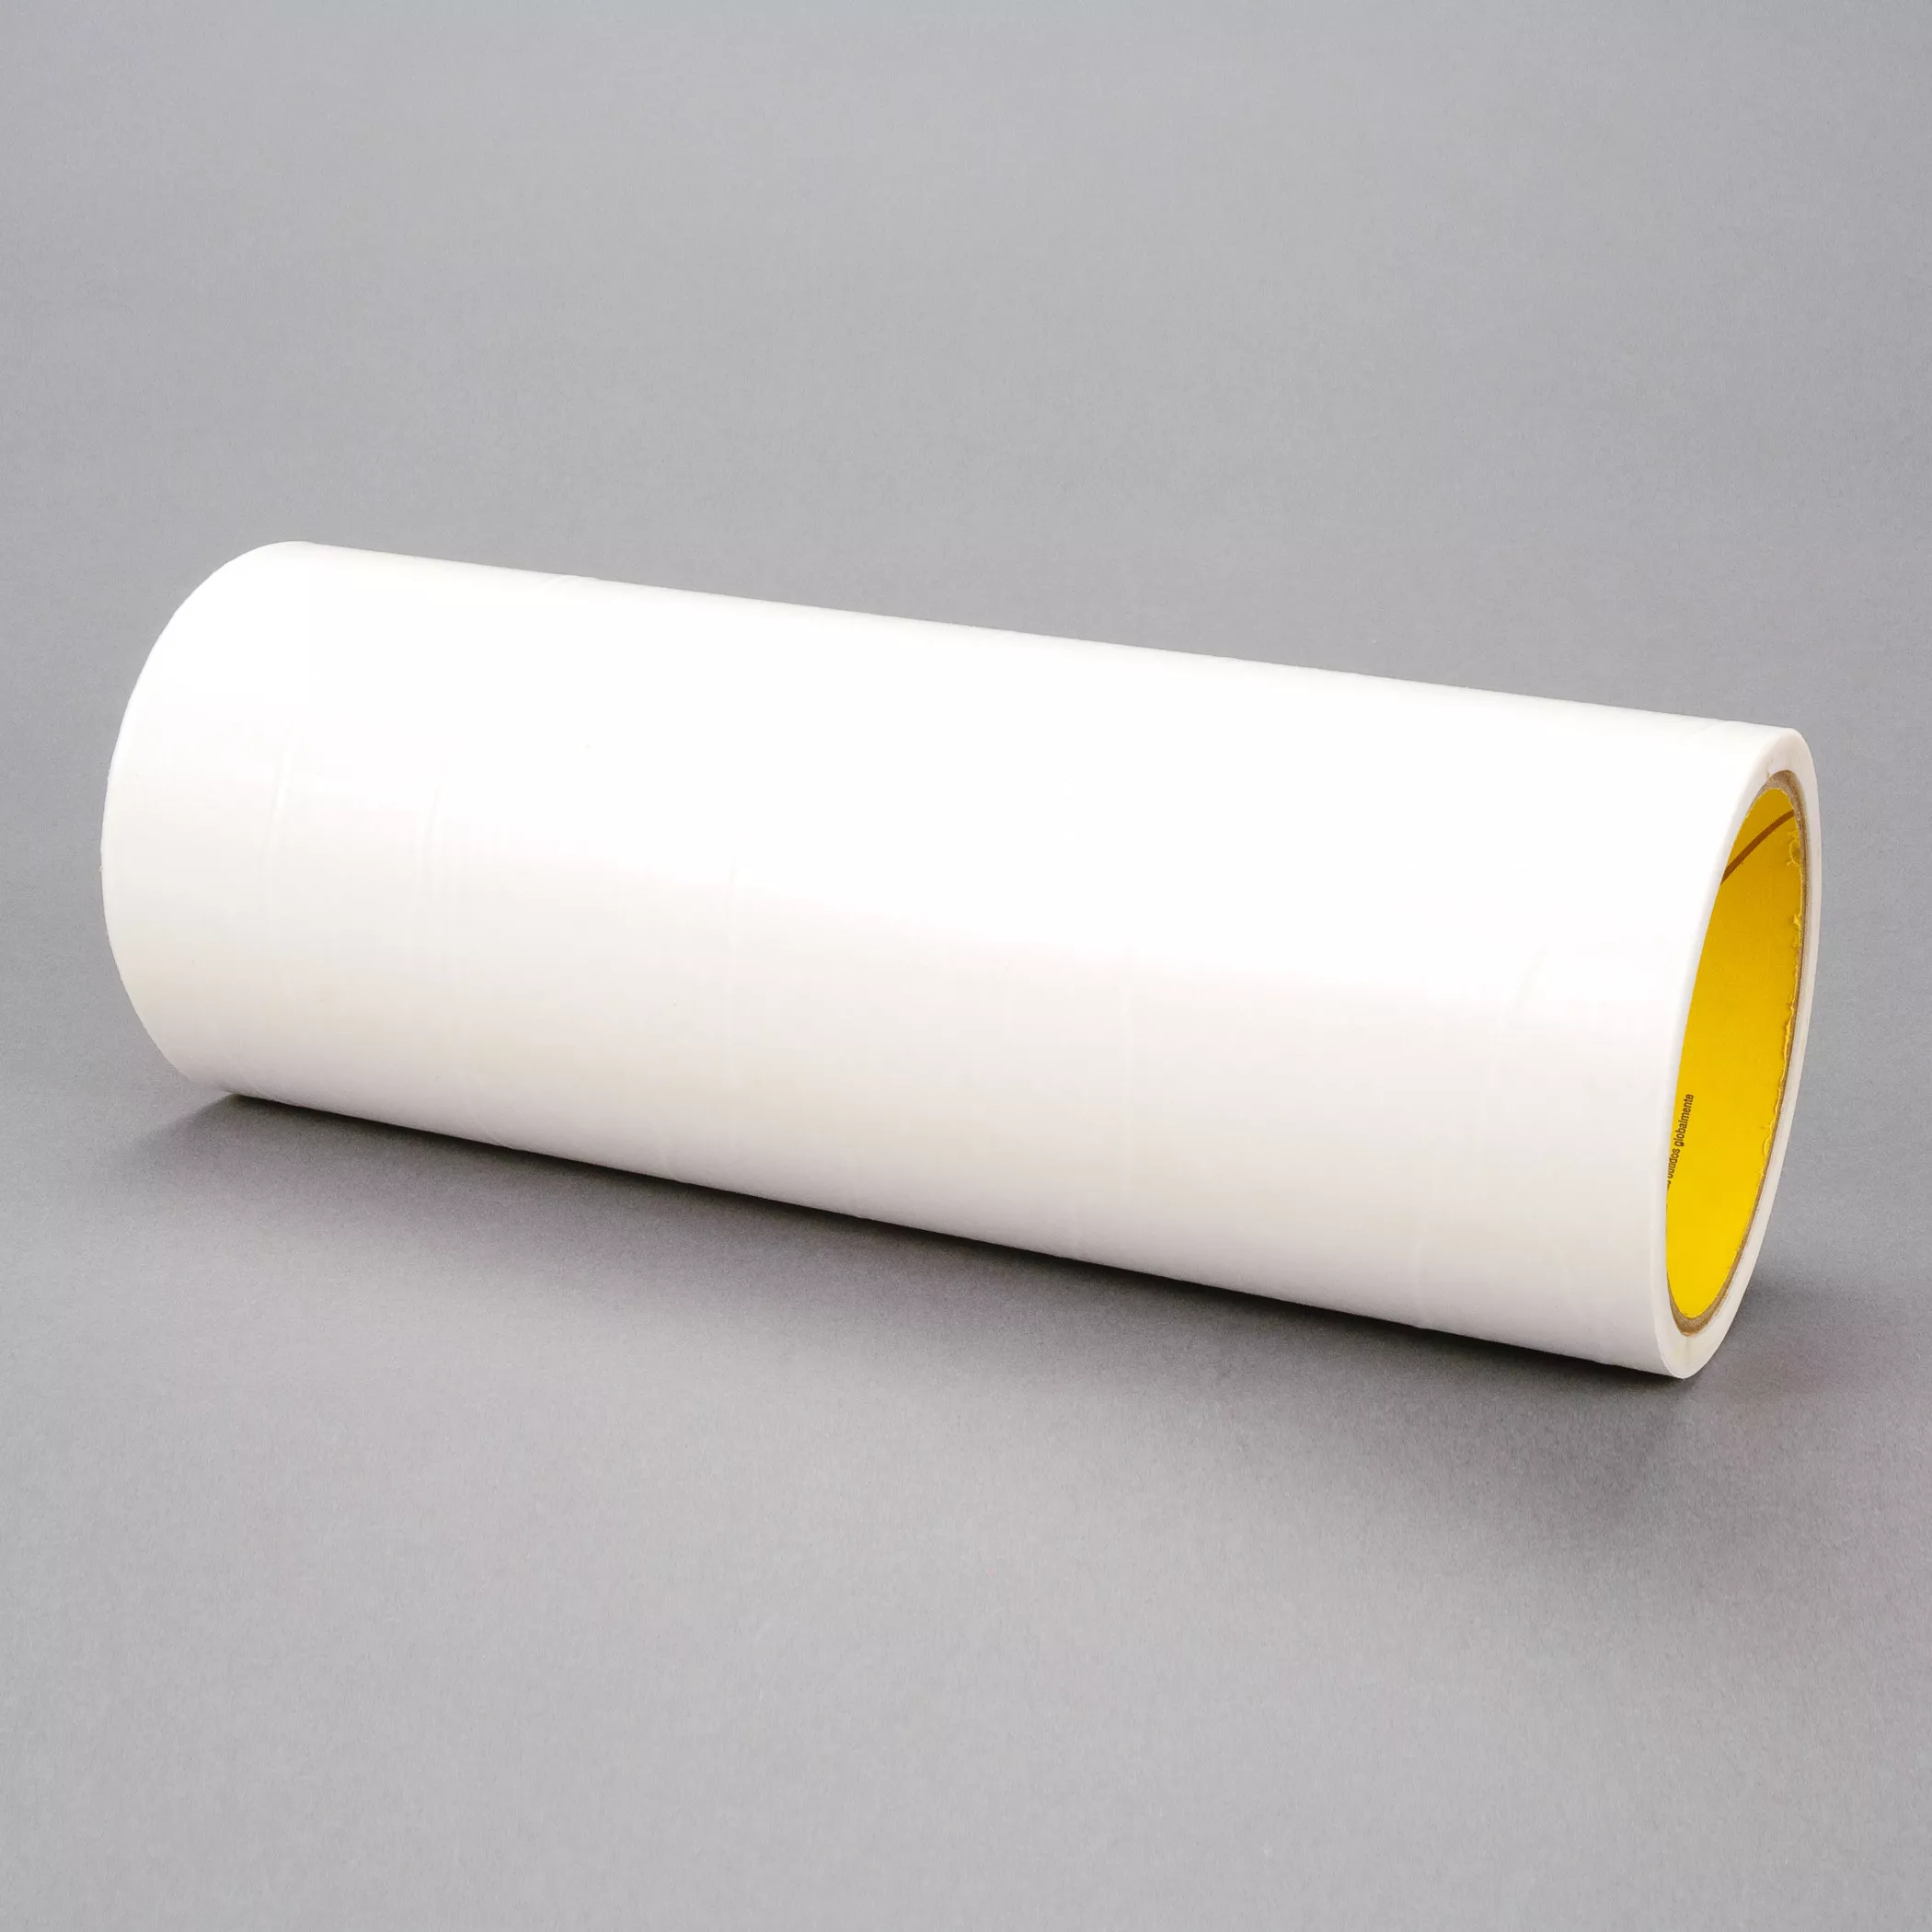 3M™ Double Coated Tape 9816M, White, 60 in x 250 yd, 3.5 mil, 1 roll per
case, 9 roll per pallet